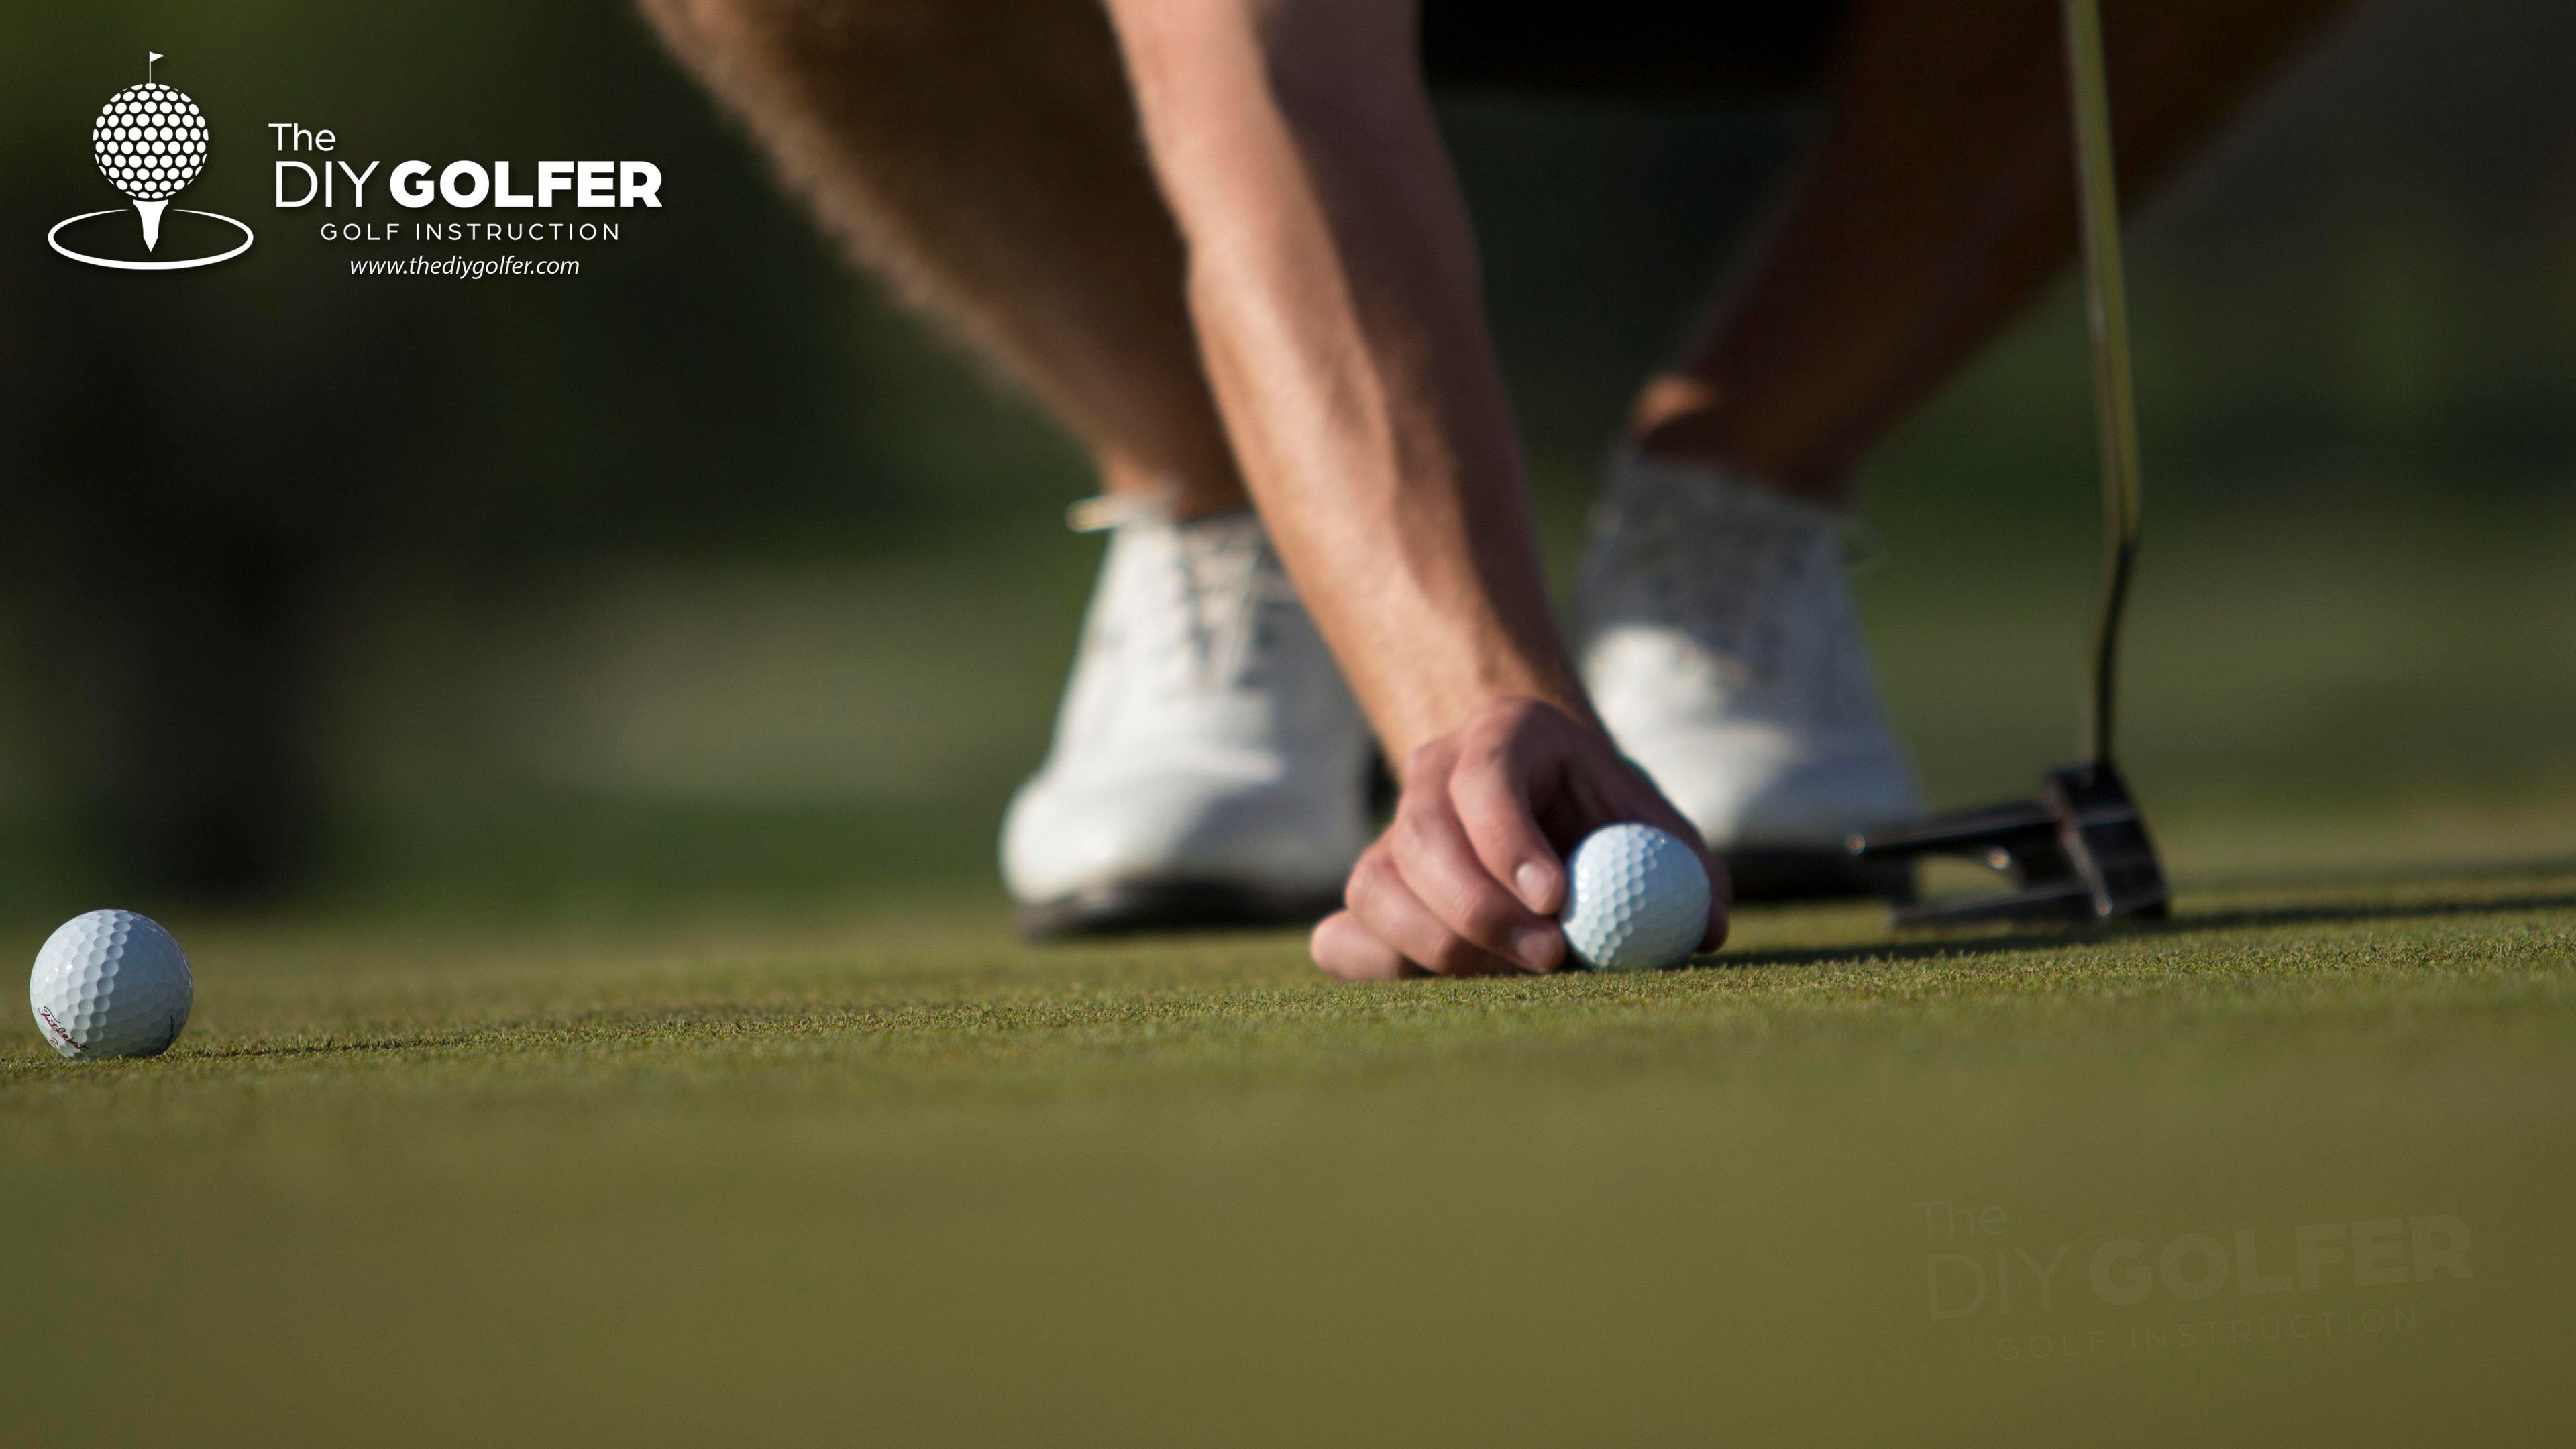 High Definition Golf Putting Photo: Lining up Golf Ball Focused